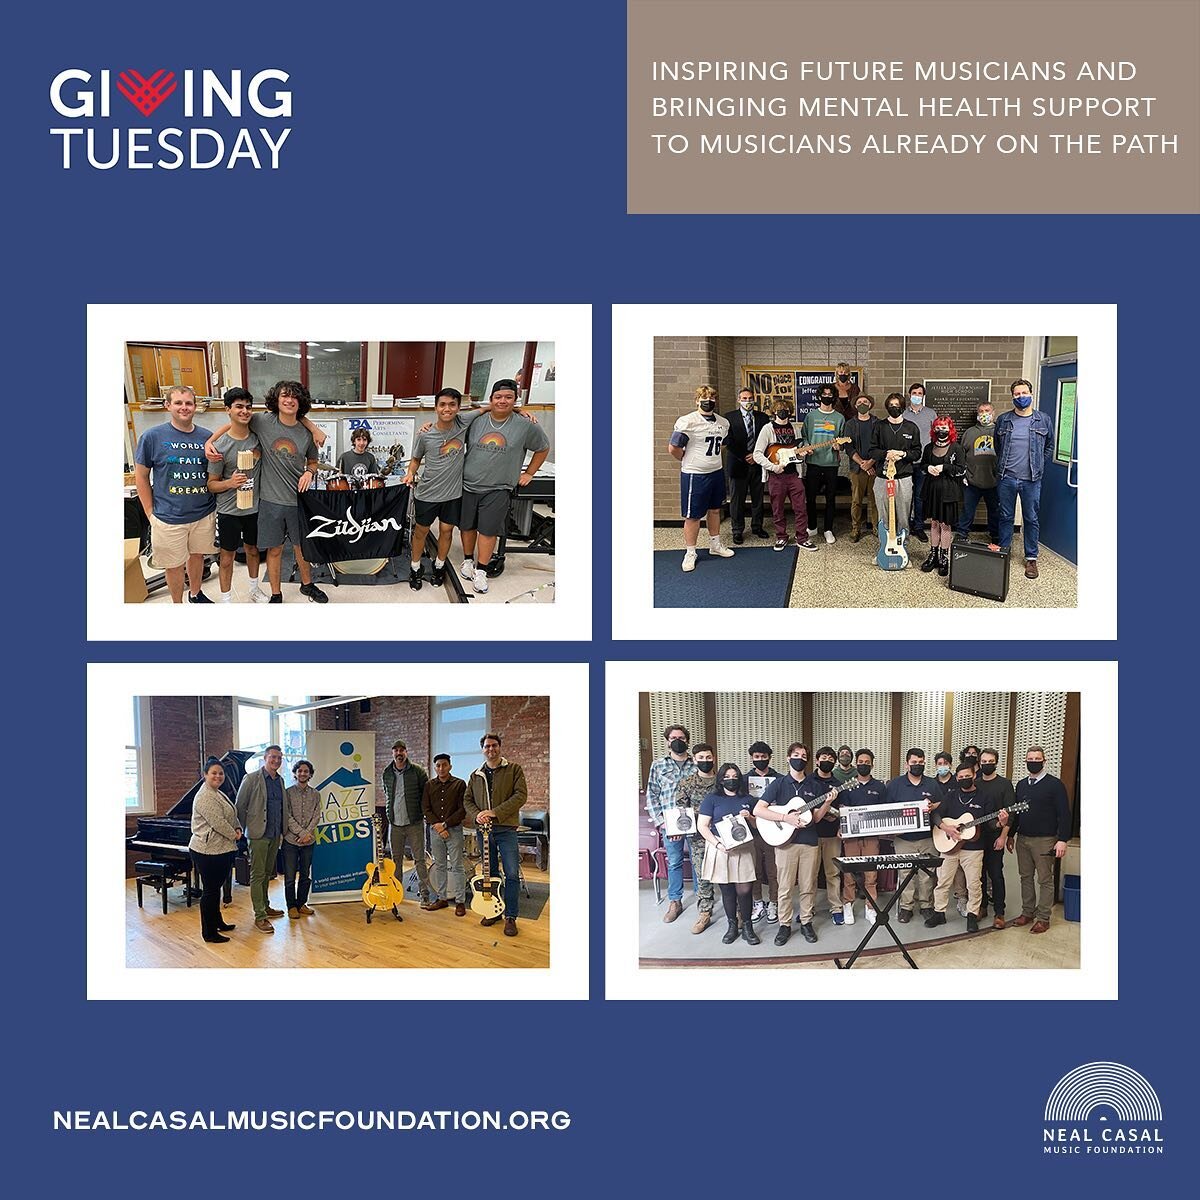 A shout-out on this #givingtuesday to all of our collaborators, supporters and students we&rsquo;ve had the honor of working with and serving! 

Today is a great day to make a year end gift to your favorite nonprofit organizations who are dedicated t